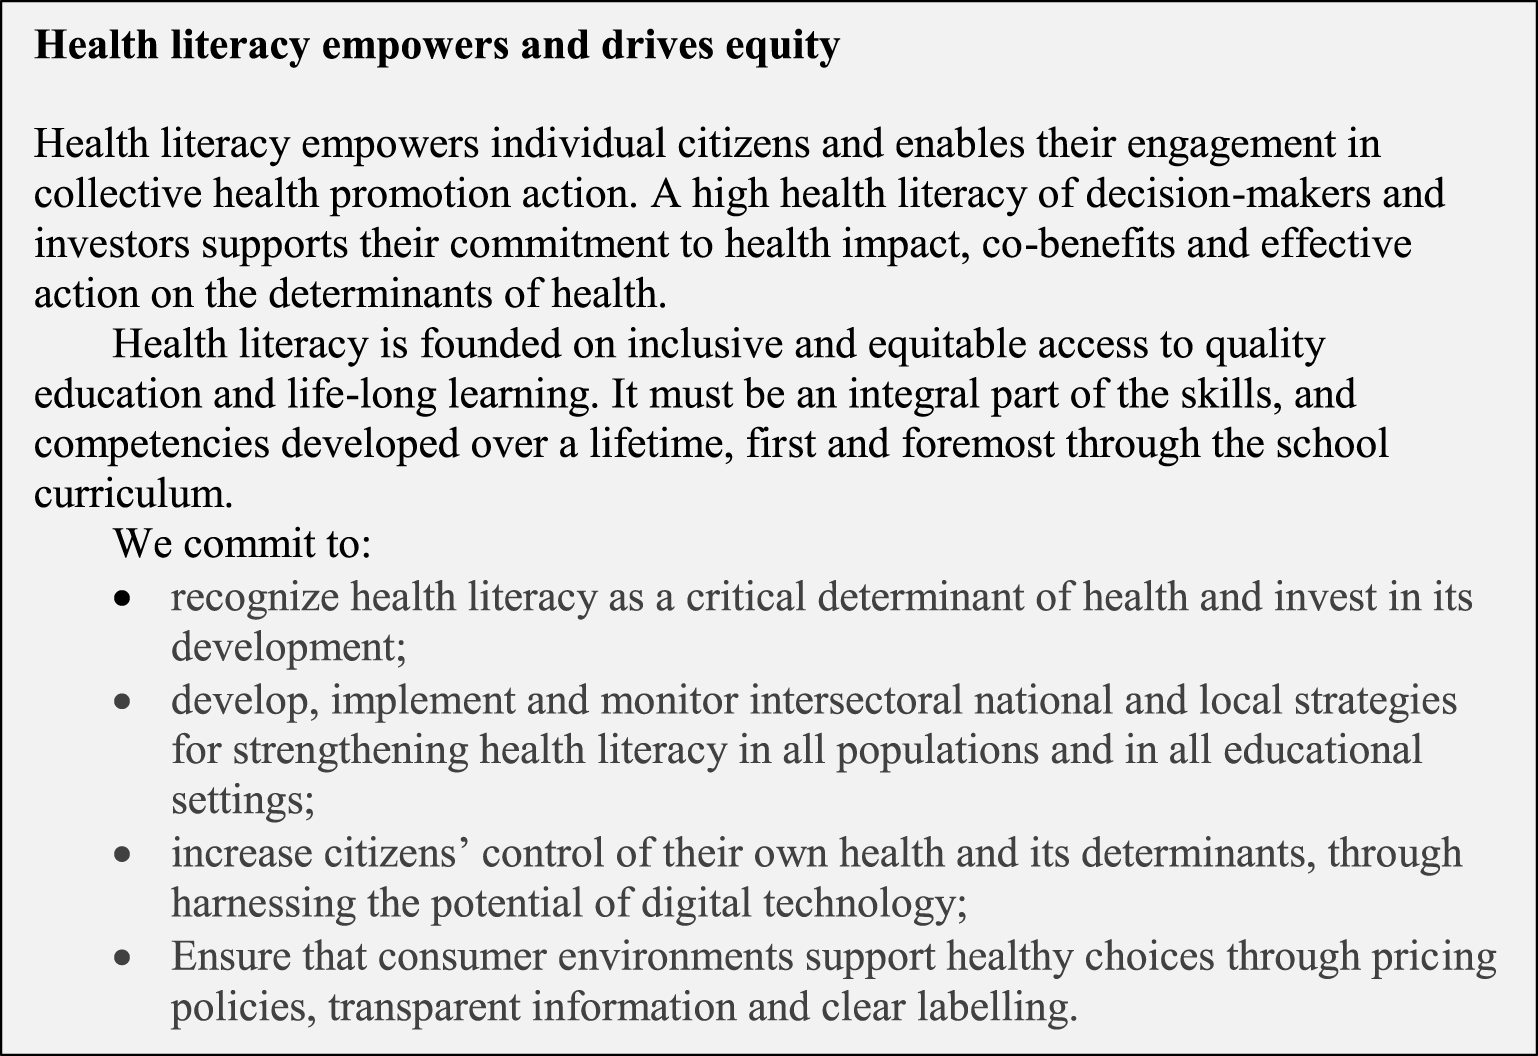 Health literacy focused section of the Shanghai Declaration on promoting health in the 2030 Agenda for Sustainable Development.